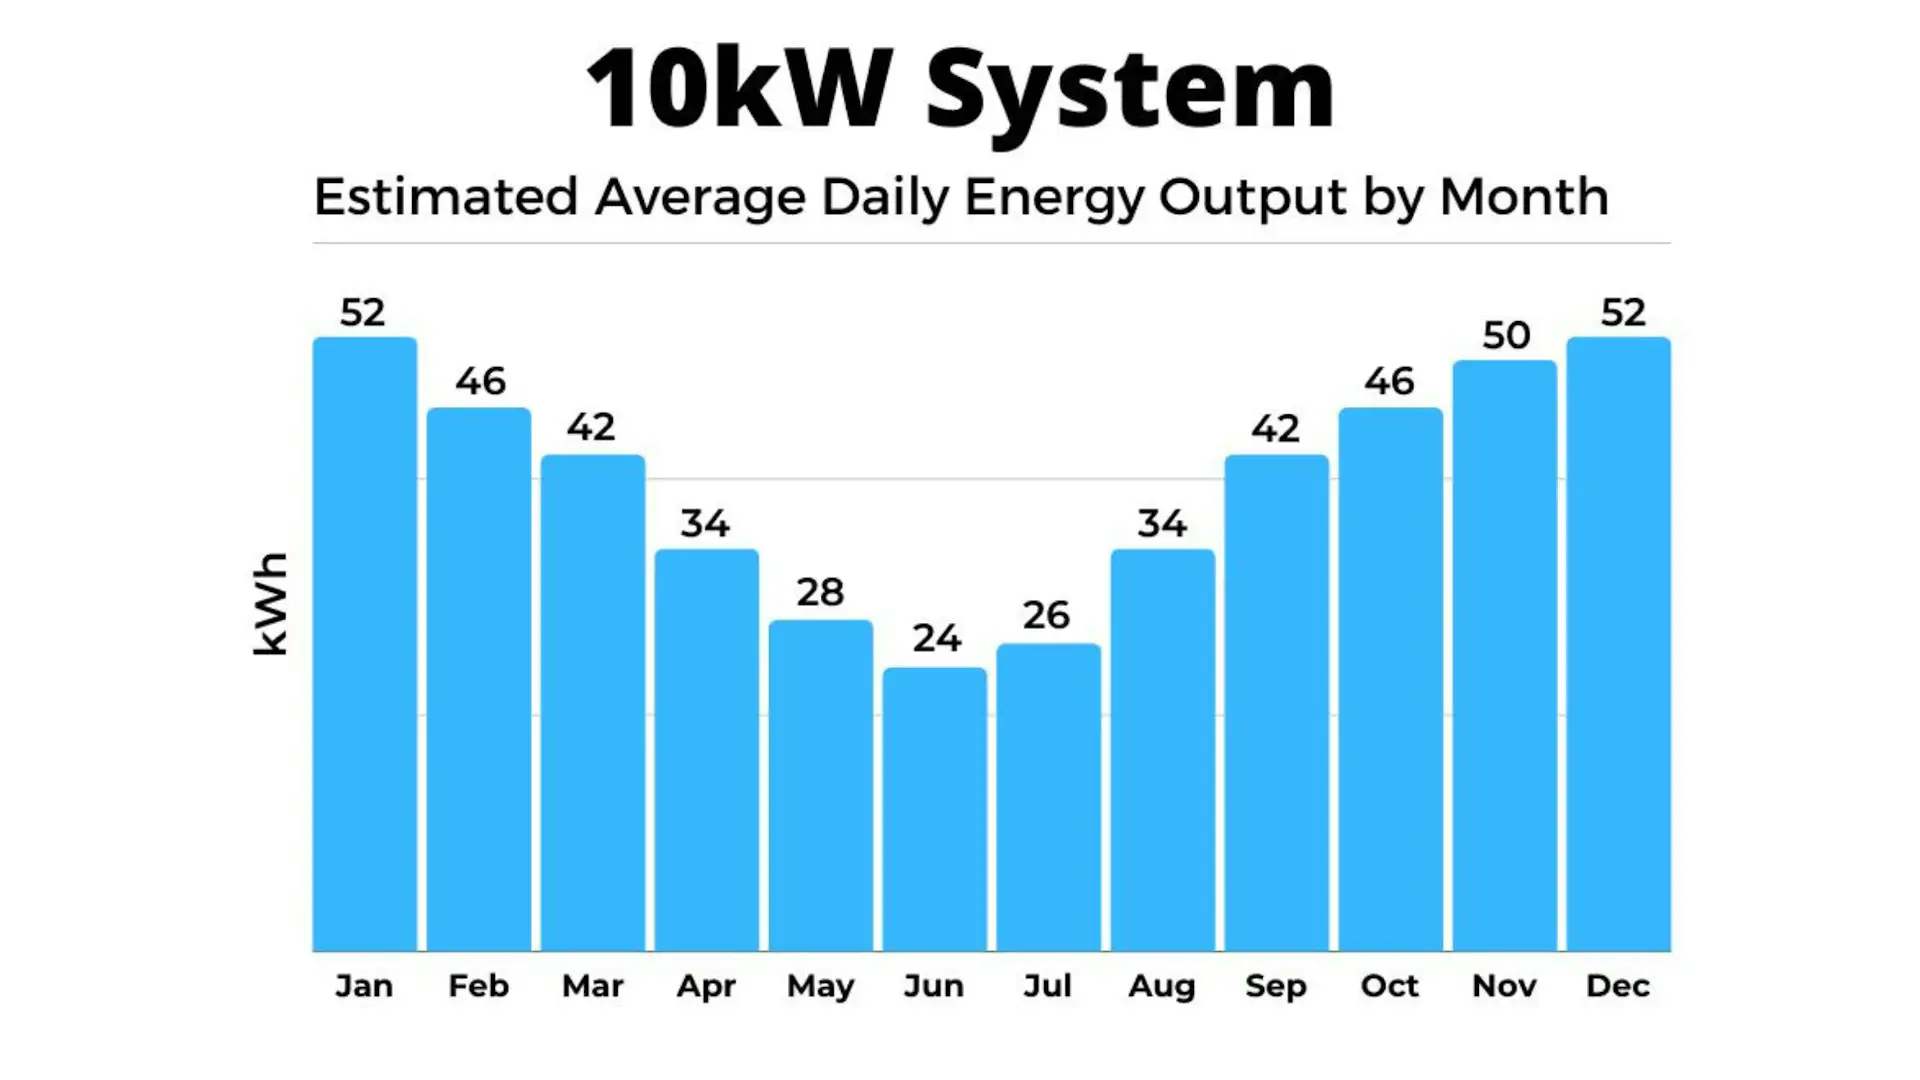 10kW solar system estimated average daily energy output by month